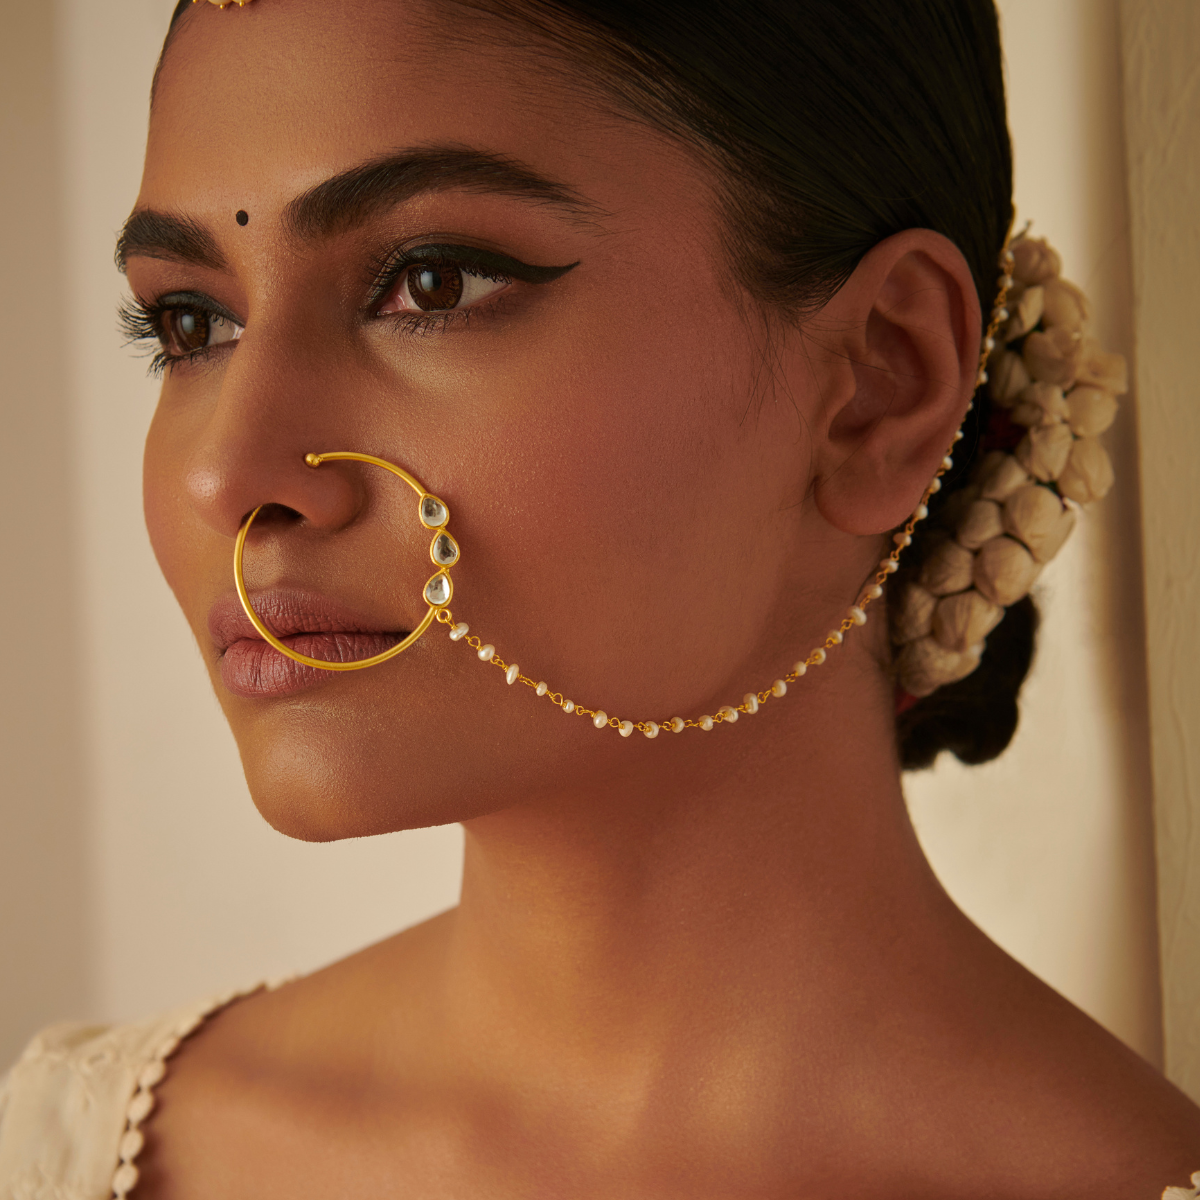 Delicate Dream Nose Ring with Mirror Polki and Pearls